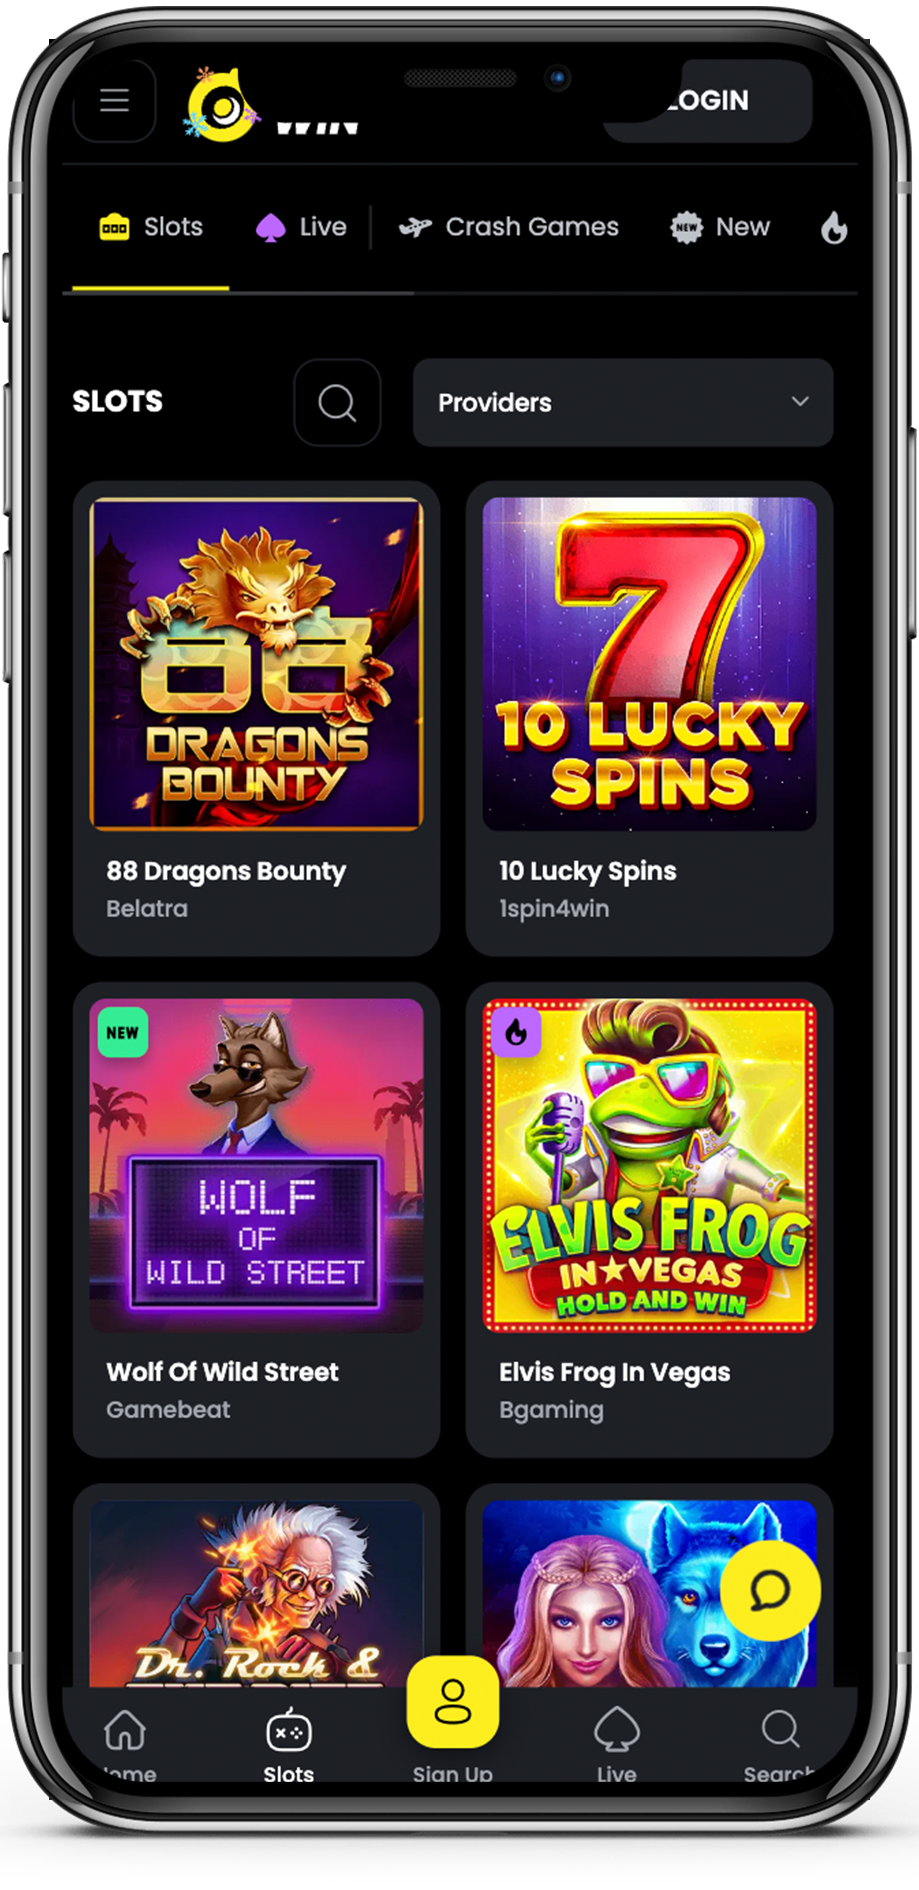 limitless casino free spins